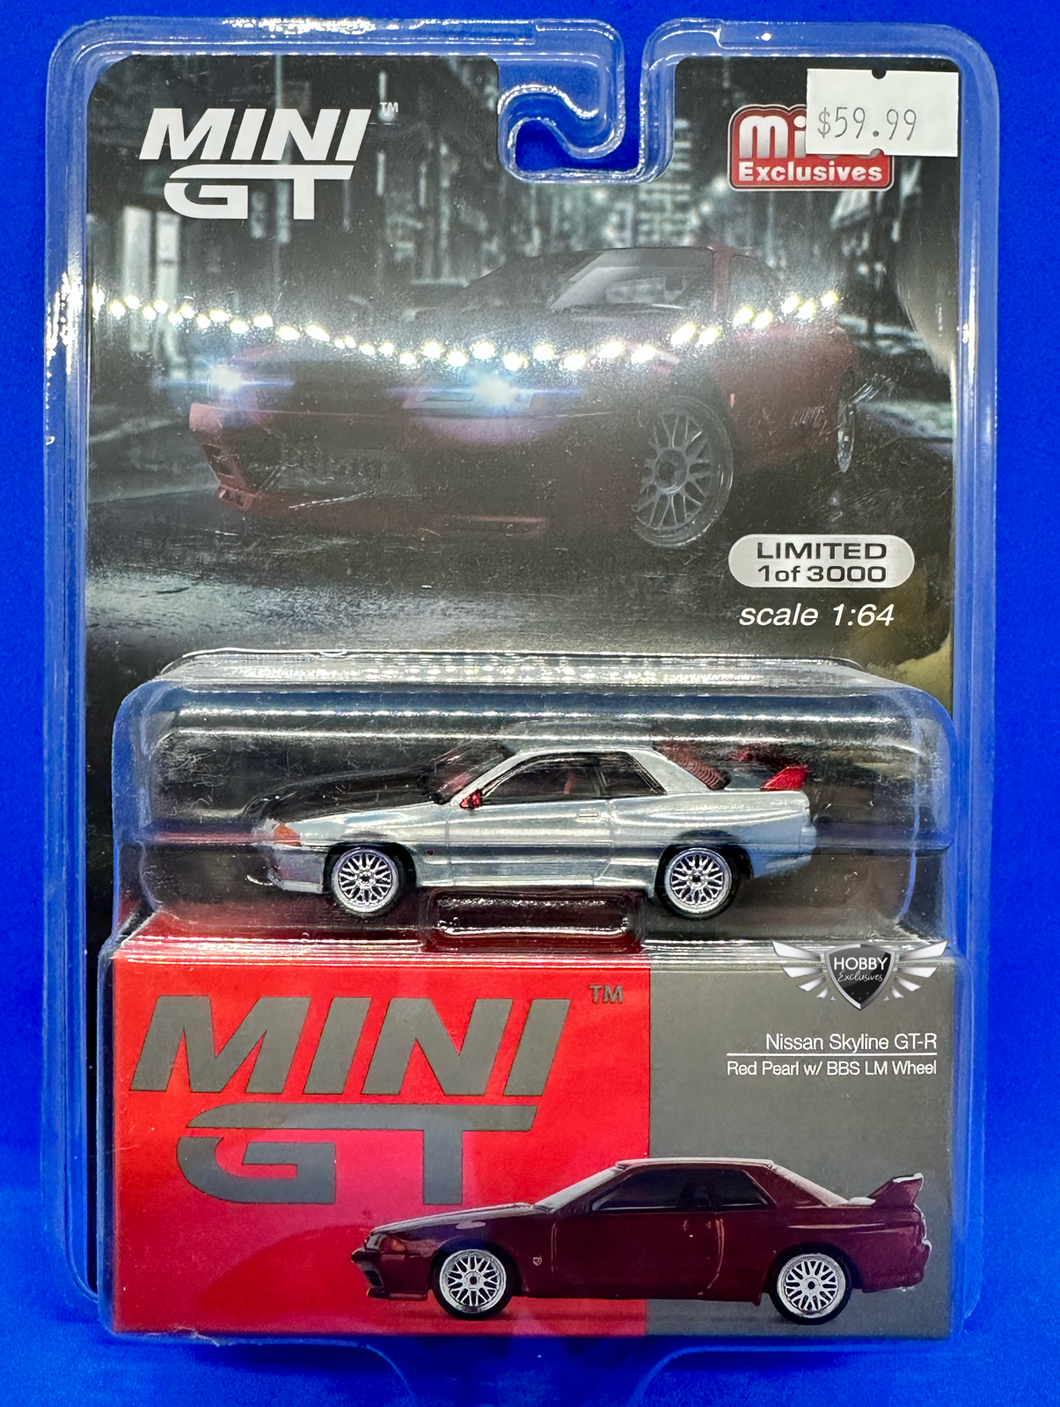 Nissan Skyline GT-R Red Pearl w/BBS LM Wheel #295 MiJo Exclusive Mini GT CHASE